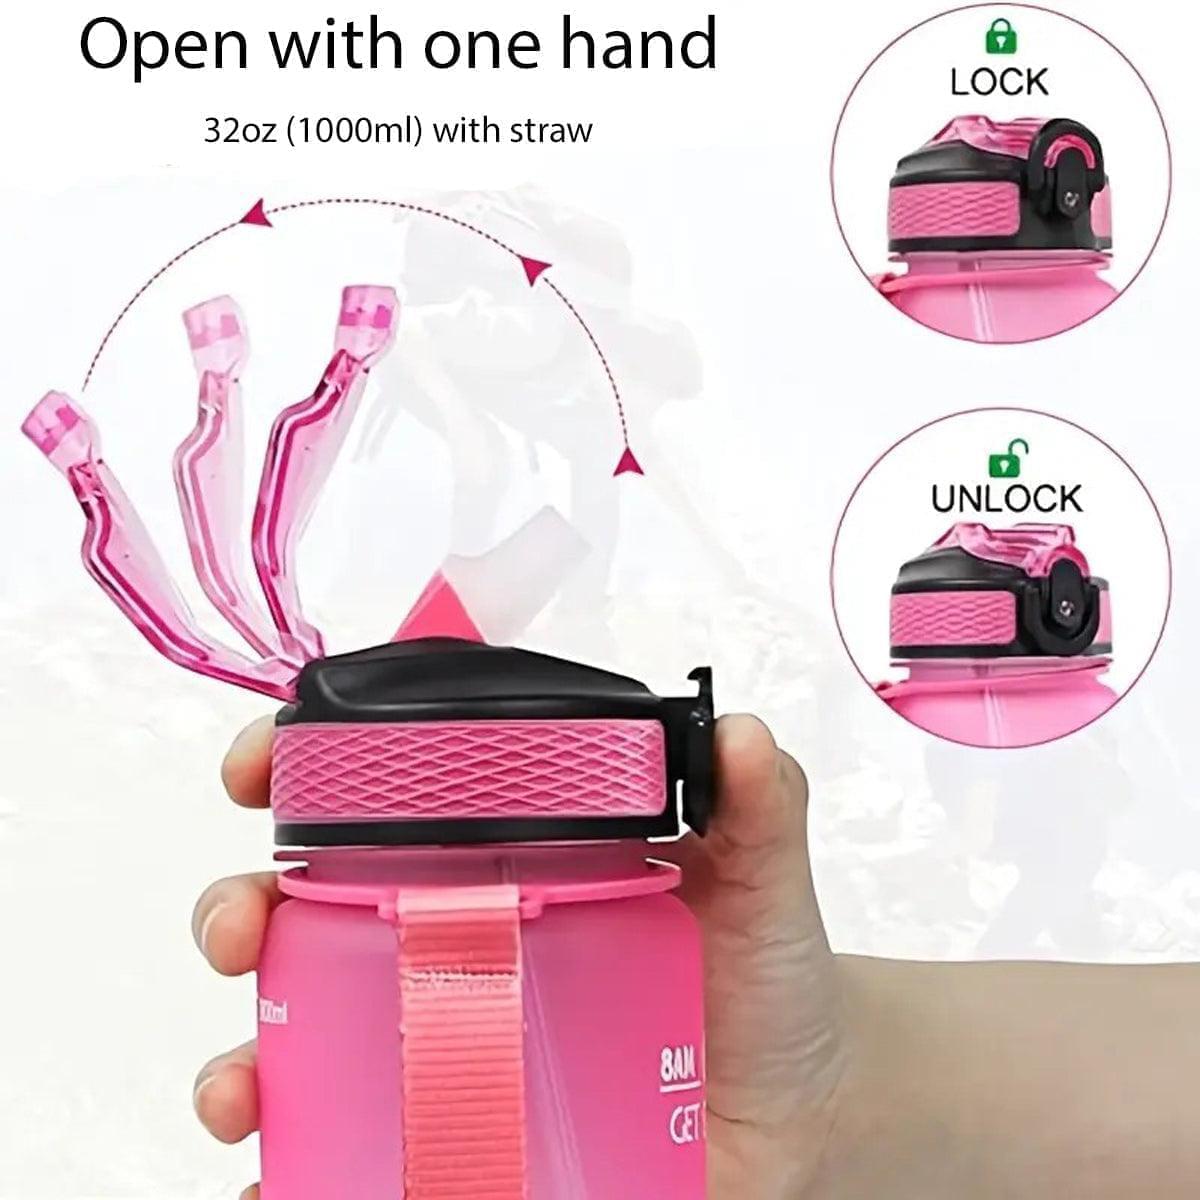 1pc Pink Time Marked Water Bottle, Transparent With Portable Strap